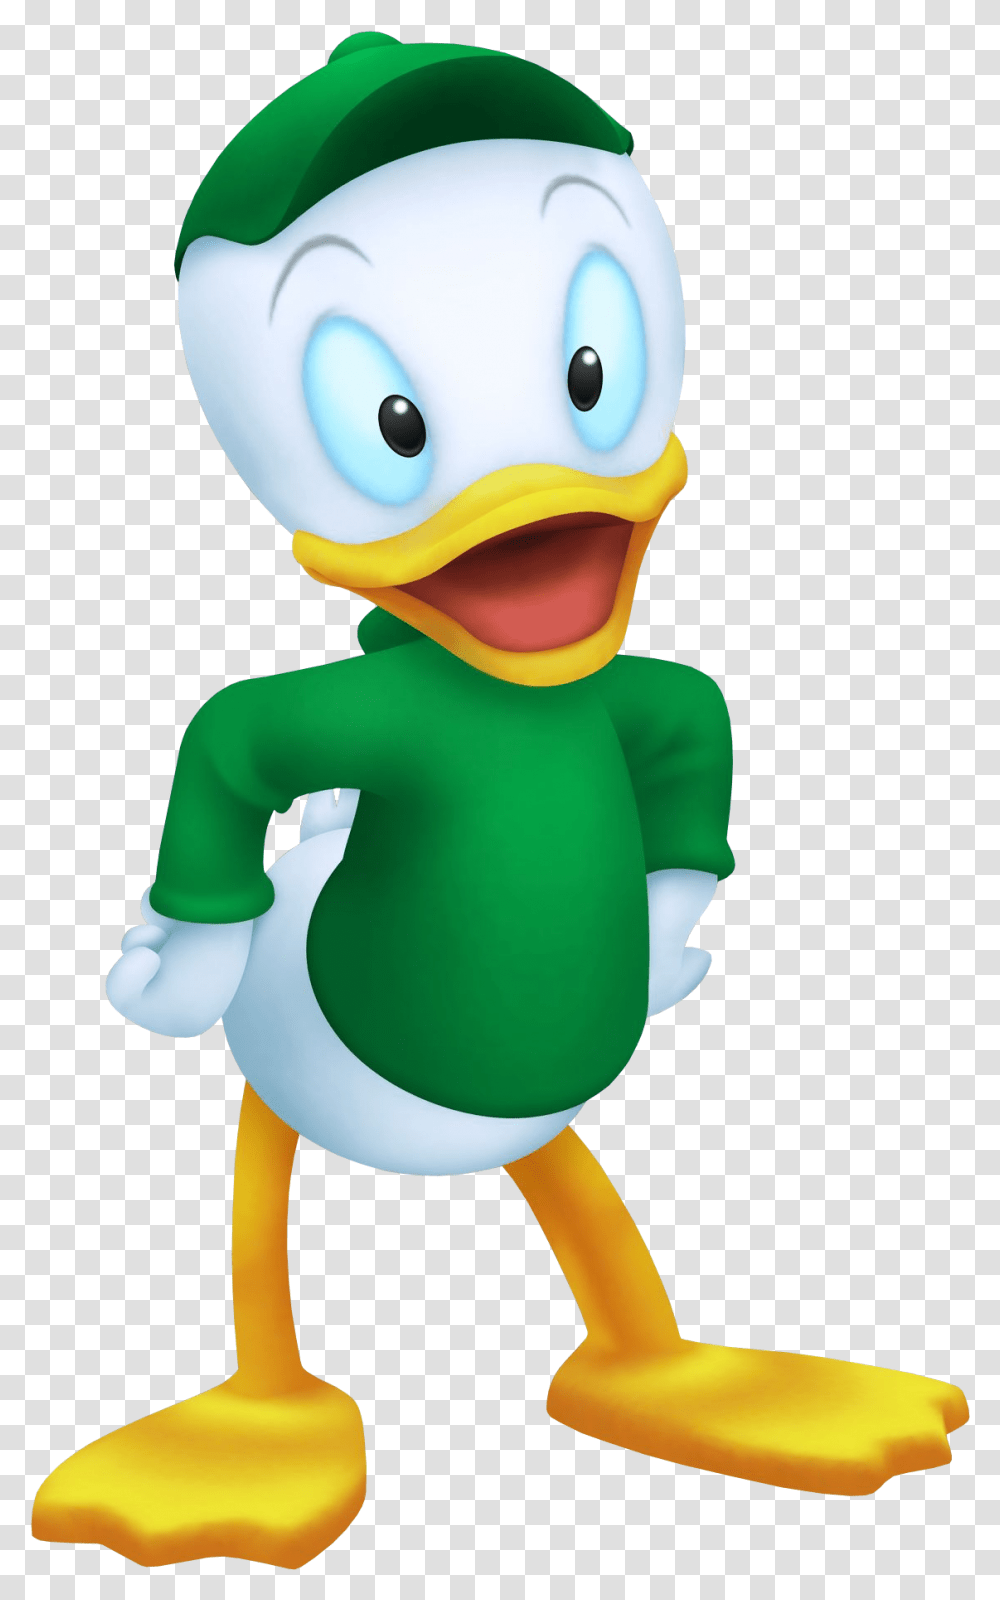 Free Download Of Donald Duck Image Without Background Huey Dewey And Louie Green, Toy, Plush, Alien, Figurine Transparent Png